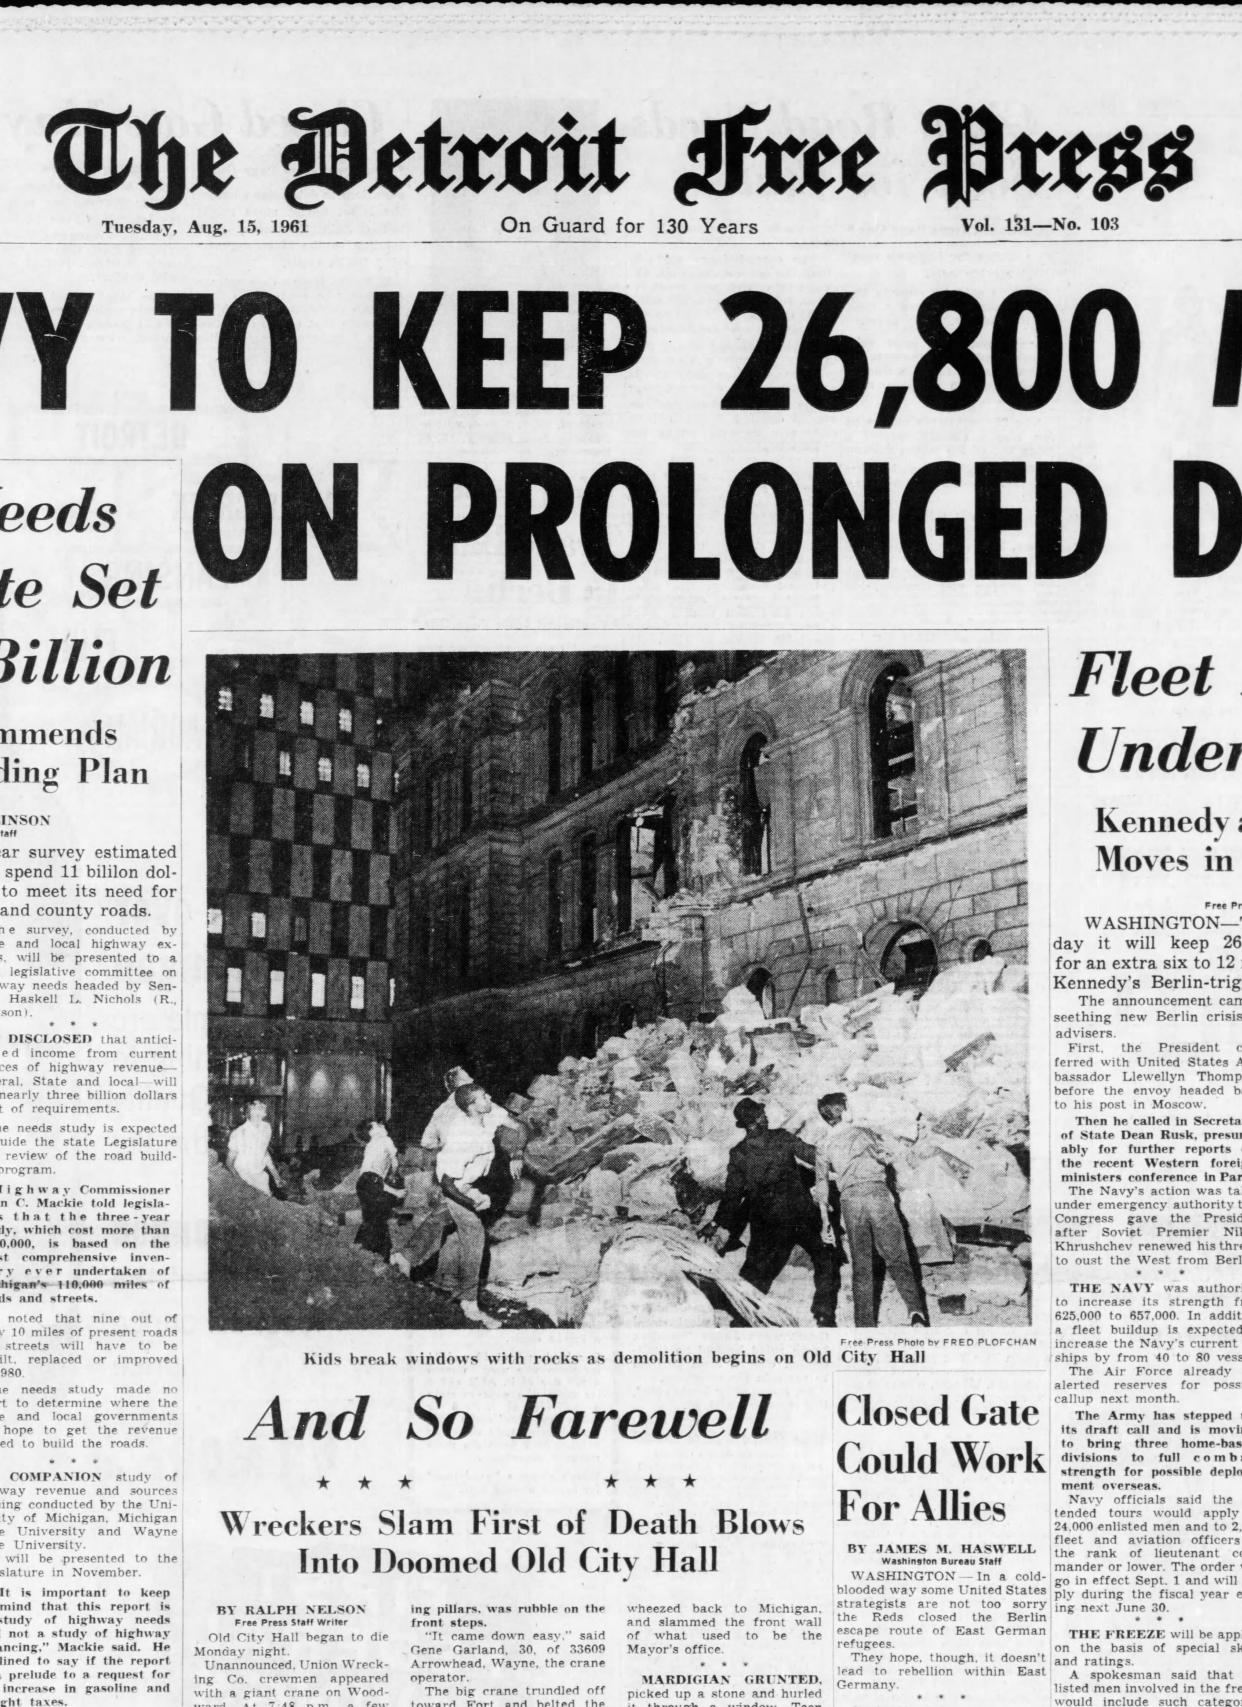 The Aug. 15, 1961, front page of the Free Press described the beginning of the demolition of City Hall.